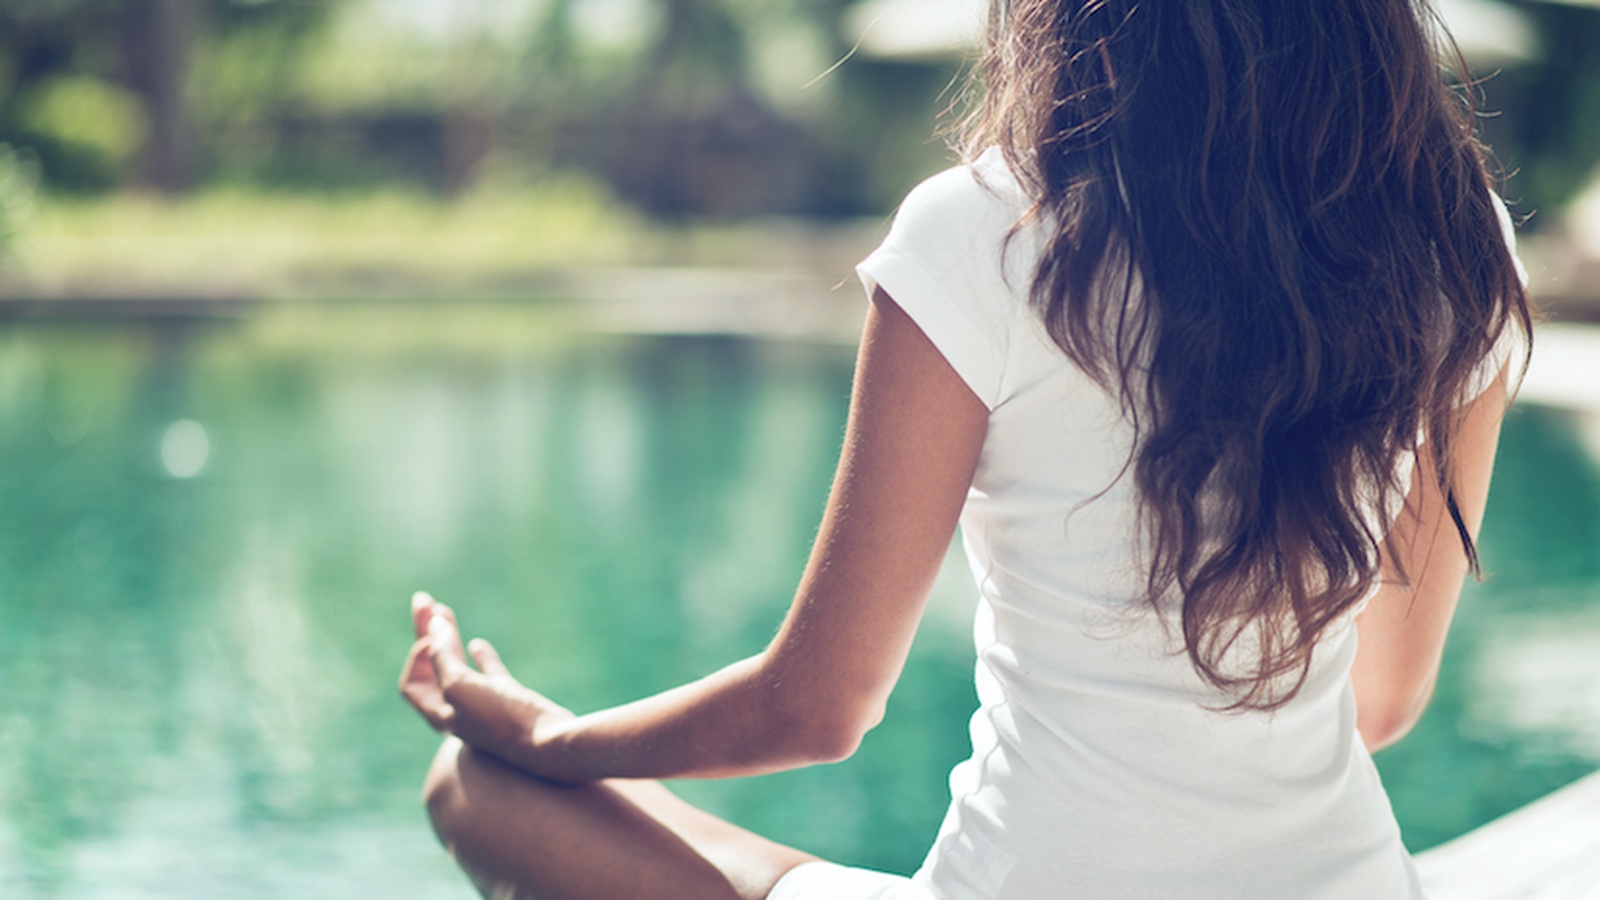 Meditation 101: How To Zen Out In Just 10 Minutes